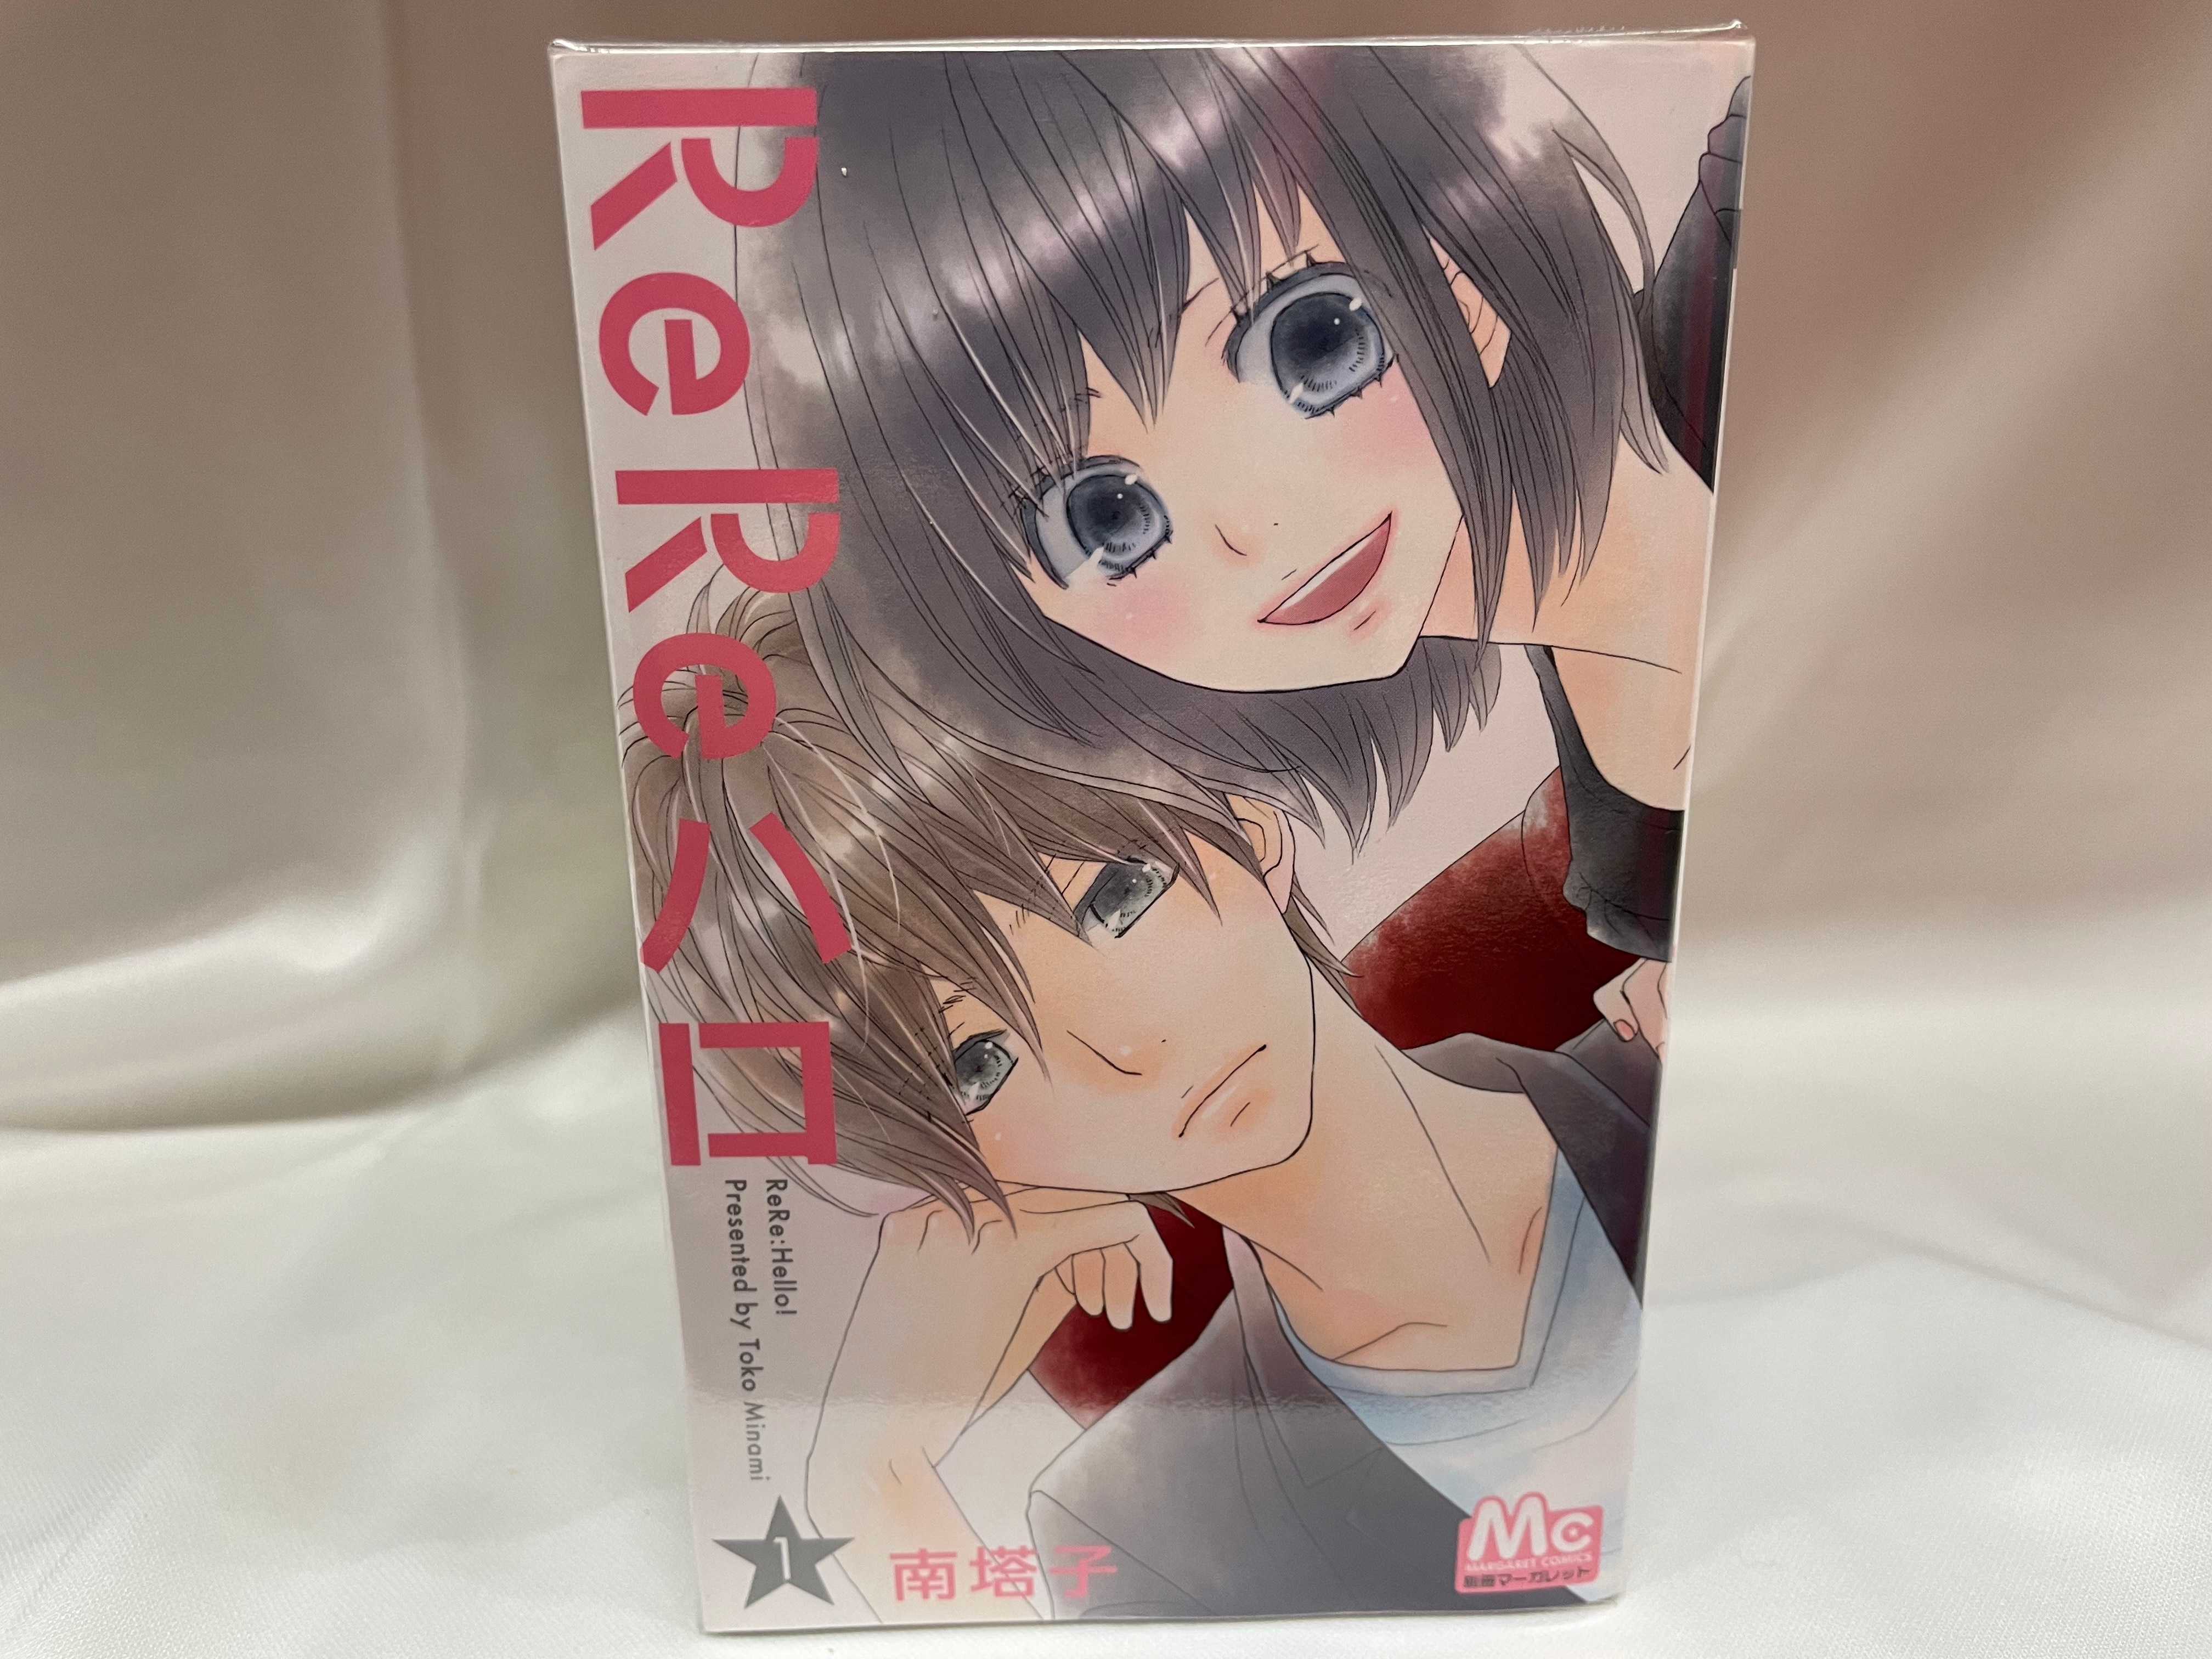 ReReハロ(リリハロ) 3冊セット 【67%OFF!】 - 少女漫画